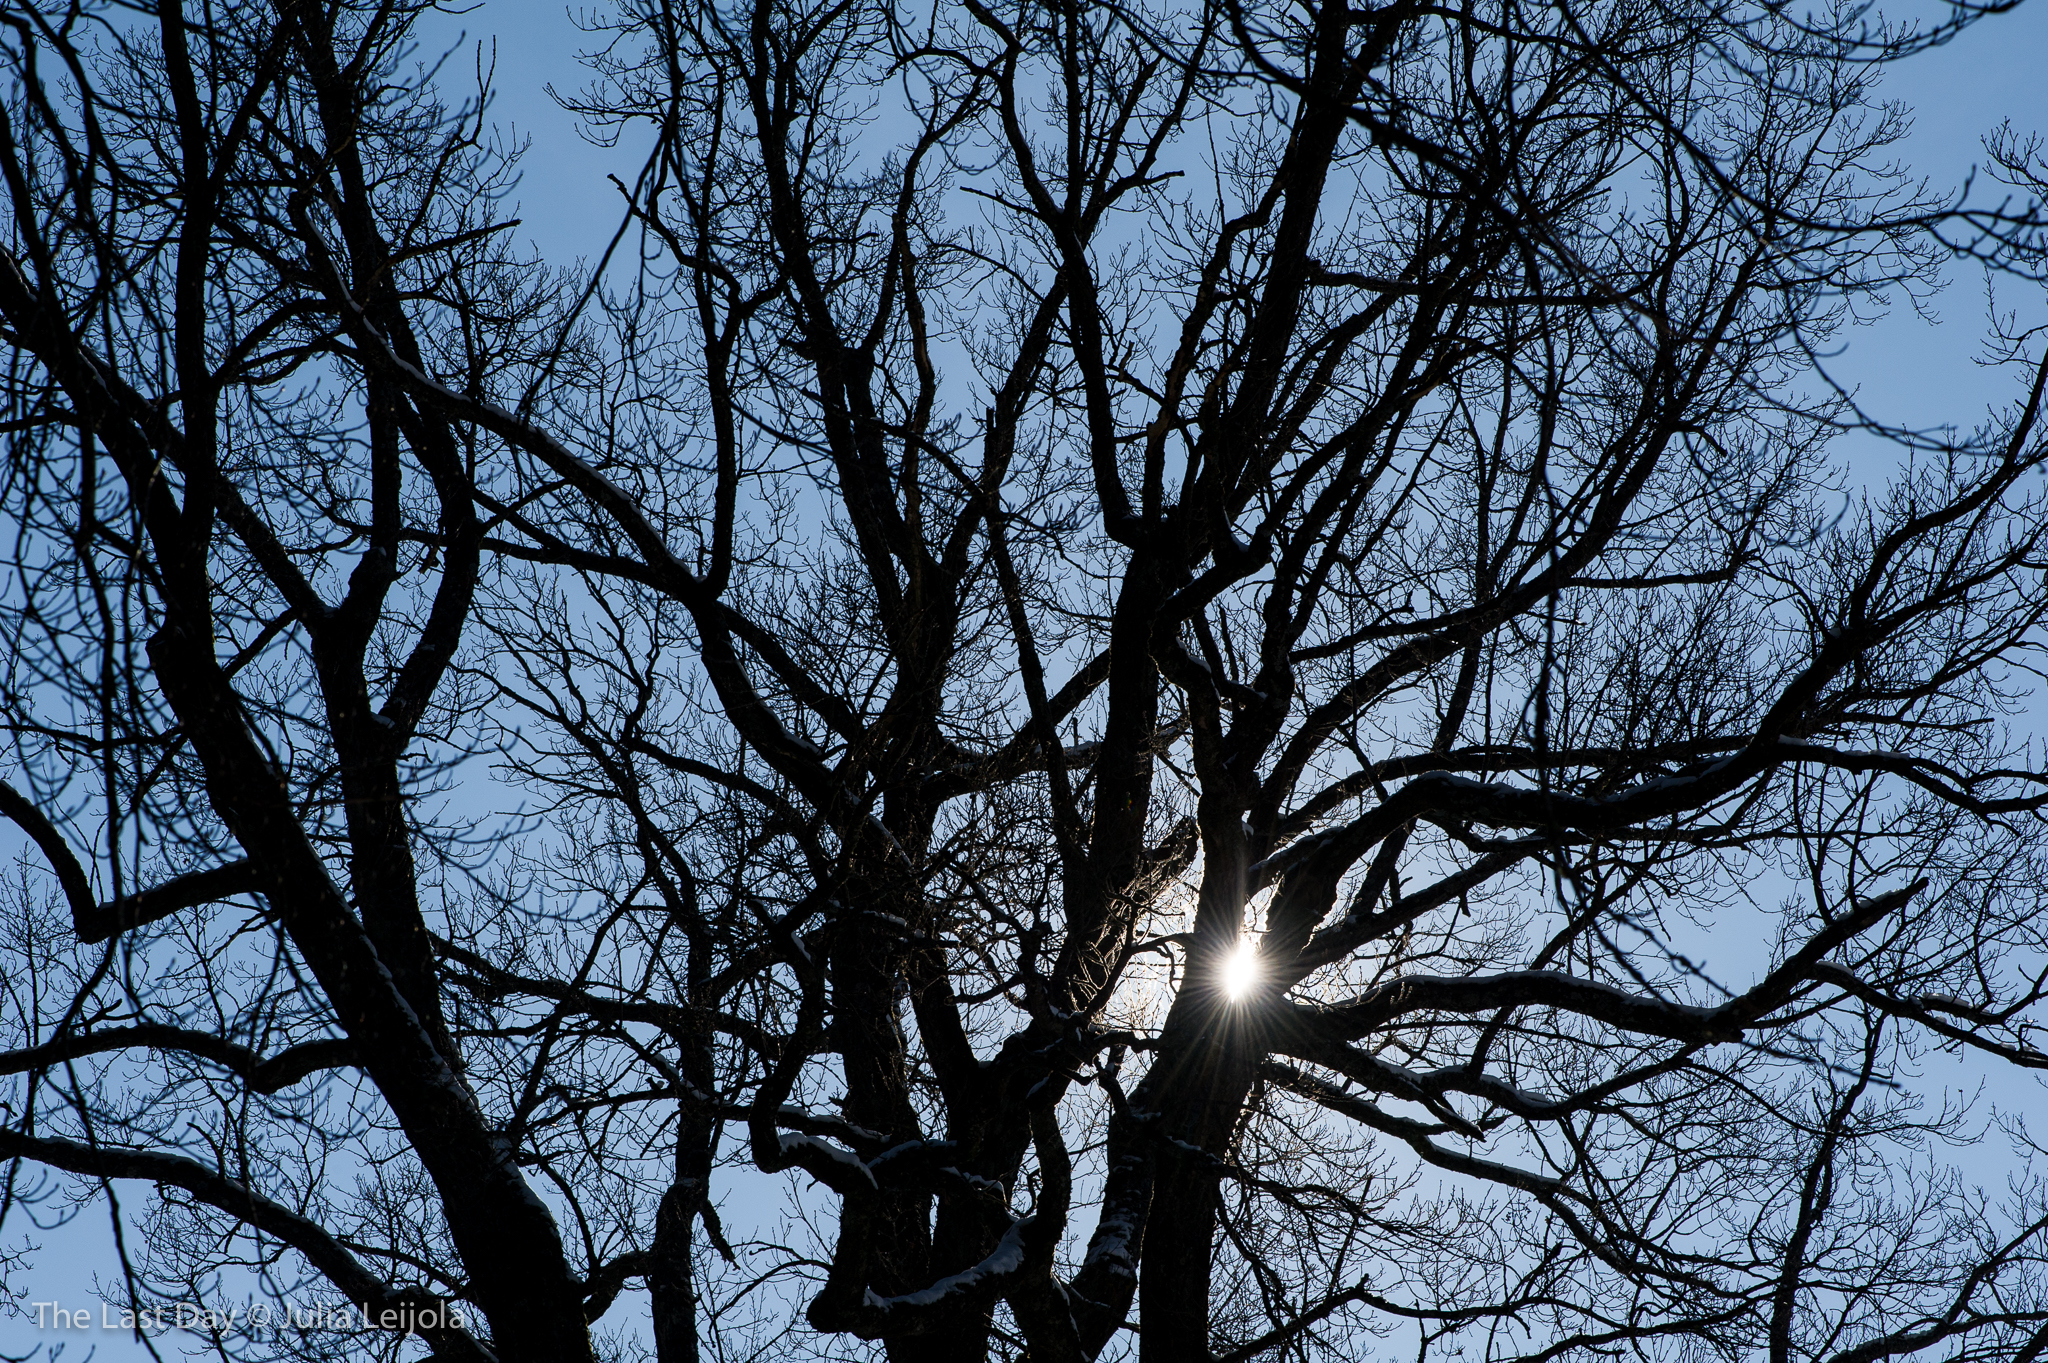 A bright sun shines through the bare braches of a large tree.